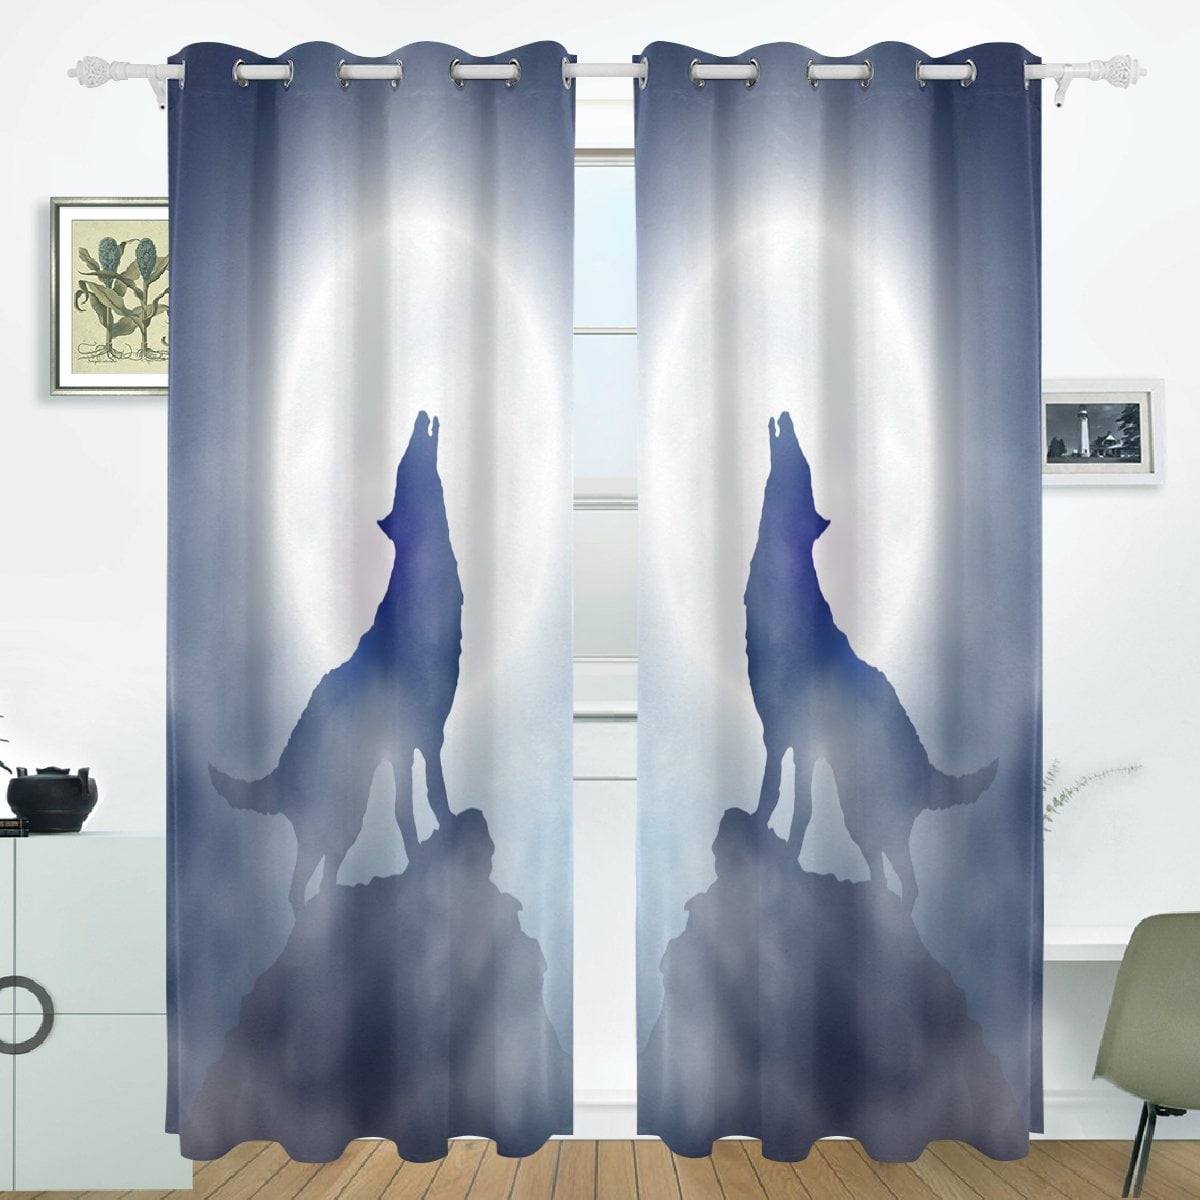 Night Starry Sky Window Curtain Wolf Curtains Home Room Decor 50% Blackout 